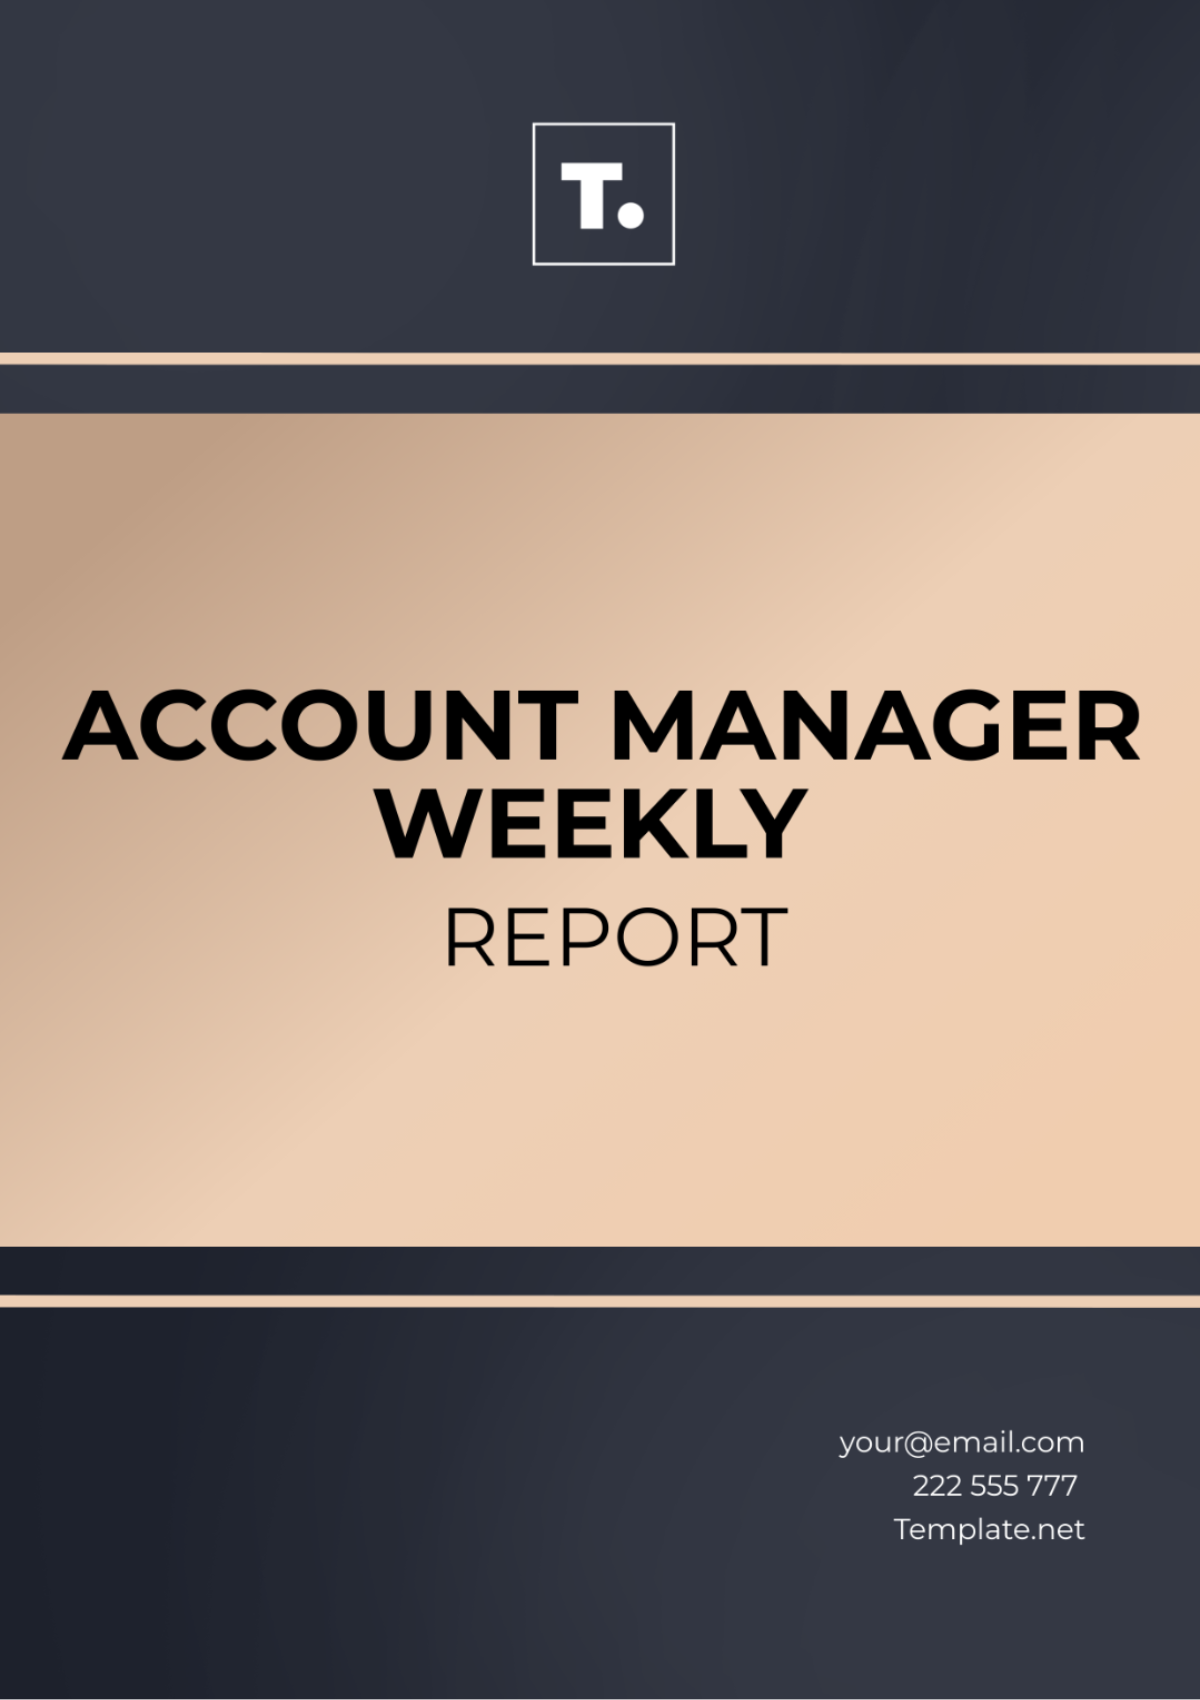 Account Manager Weekly Report Template